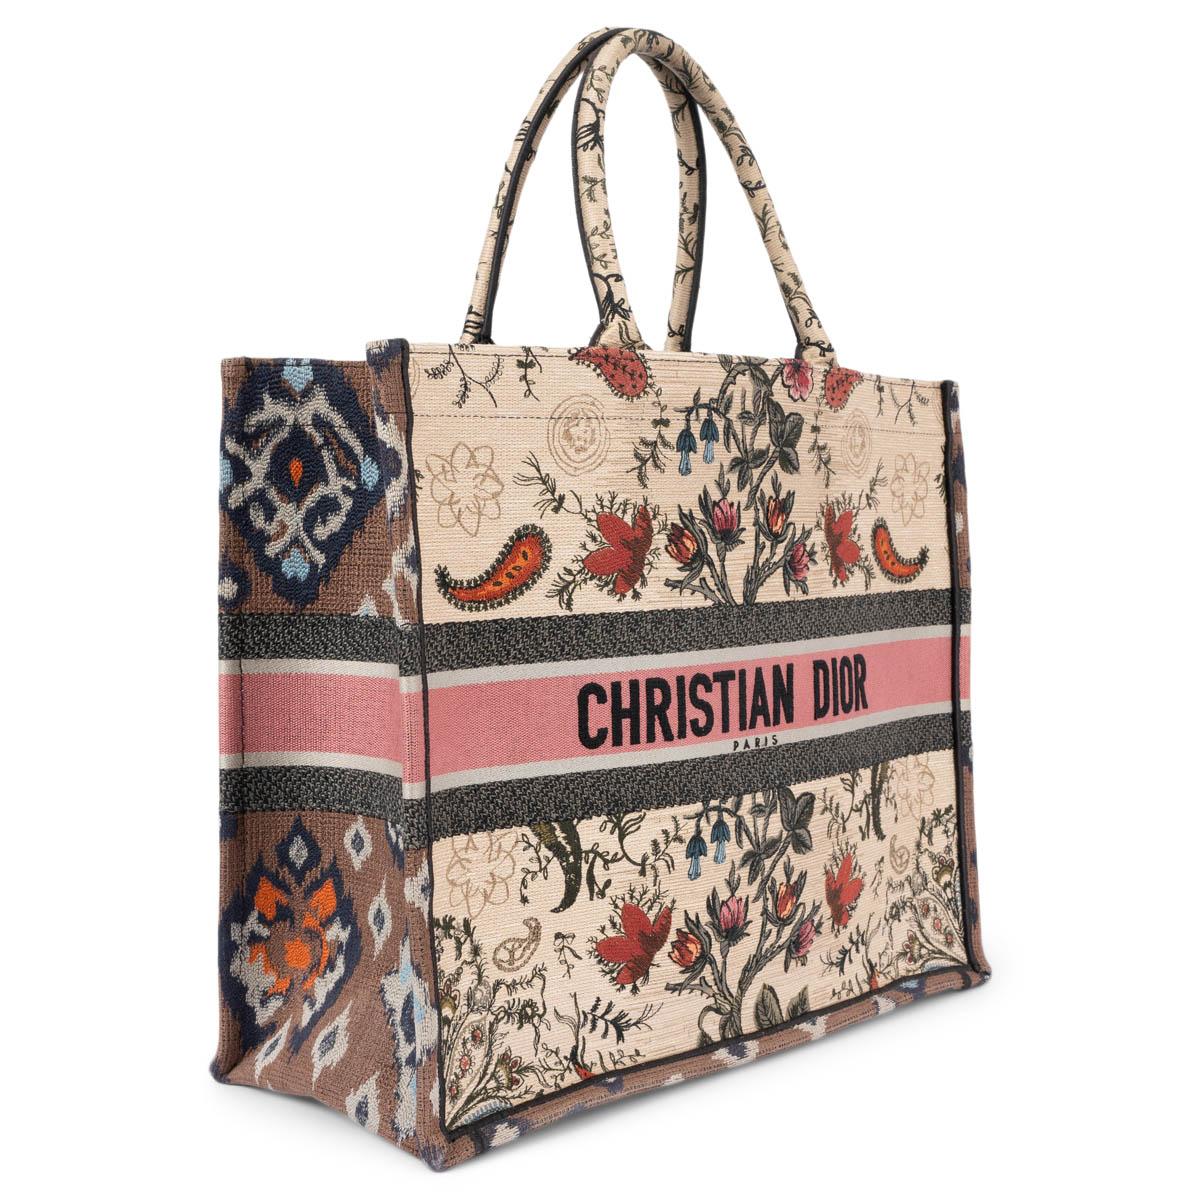 100% authentic Christian Dior Book Tote Large in beige, brown, pink and midnight blue floral embroidered canvas. Unlined. Has been carried and is in excellent condition. 

2021 Spring/Summer

Measurements
Height	34cm (13.3in)
Width	40cm